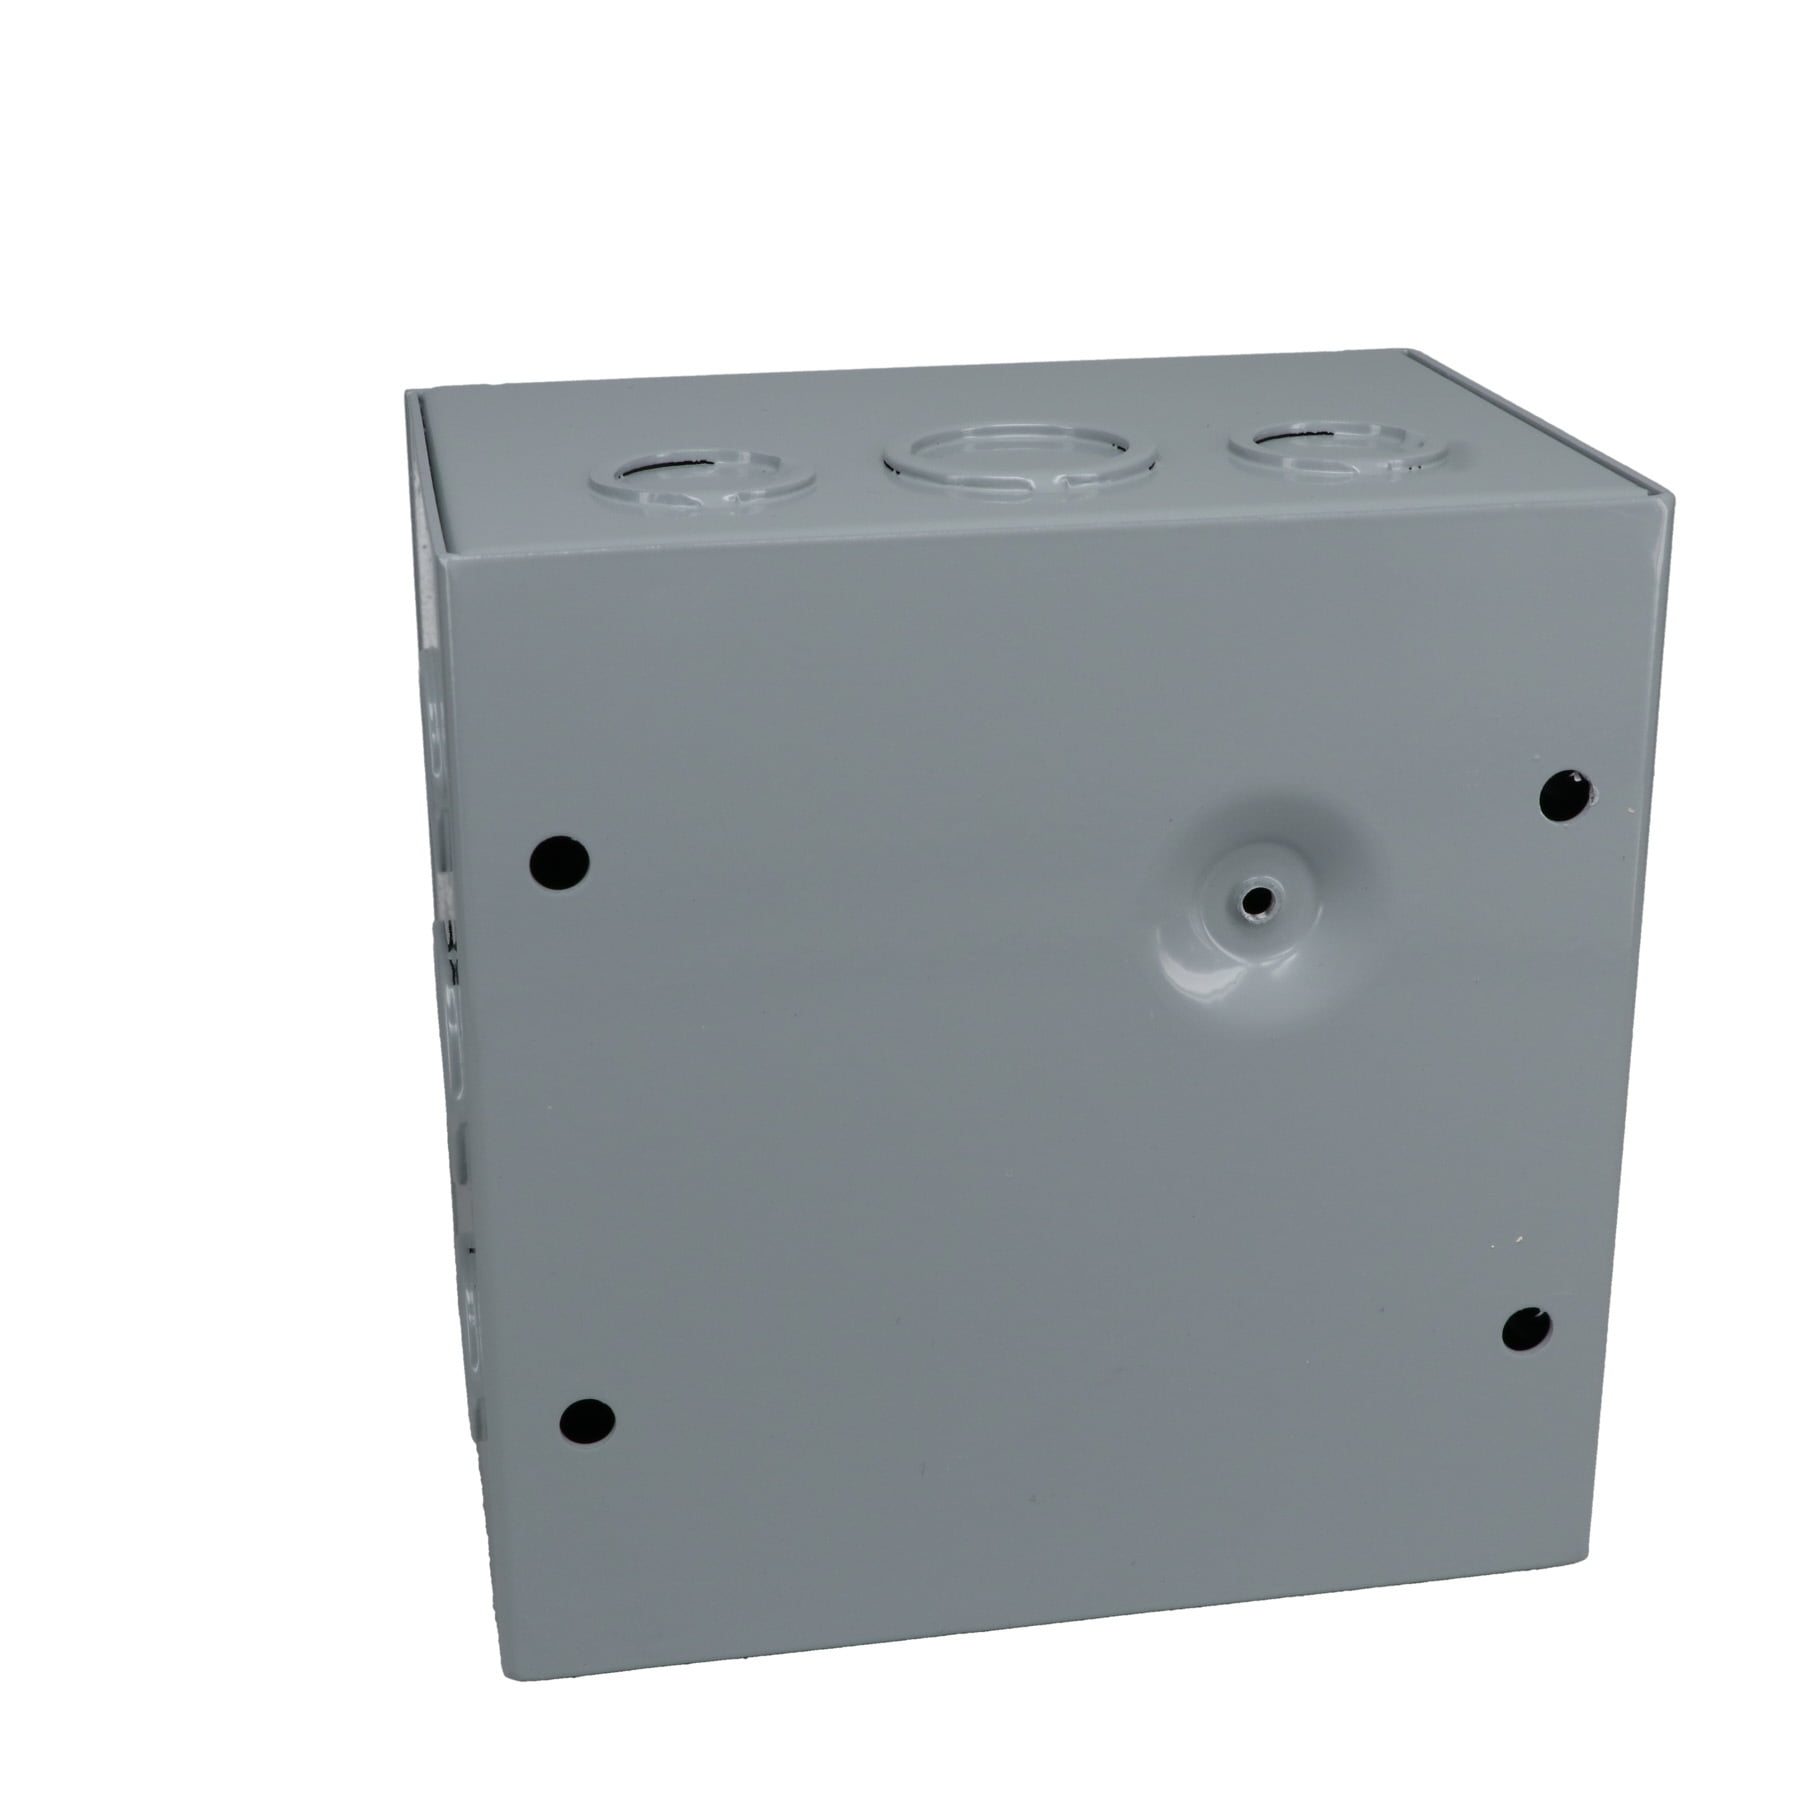 8 Width x 10 Height x 4 Depth Gray Finish BUD Industries JB-3958-KO Steel NEMA 1 Sheet Metal Junction Box with Knockout and Lift-Off Screw Cover 